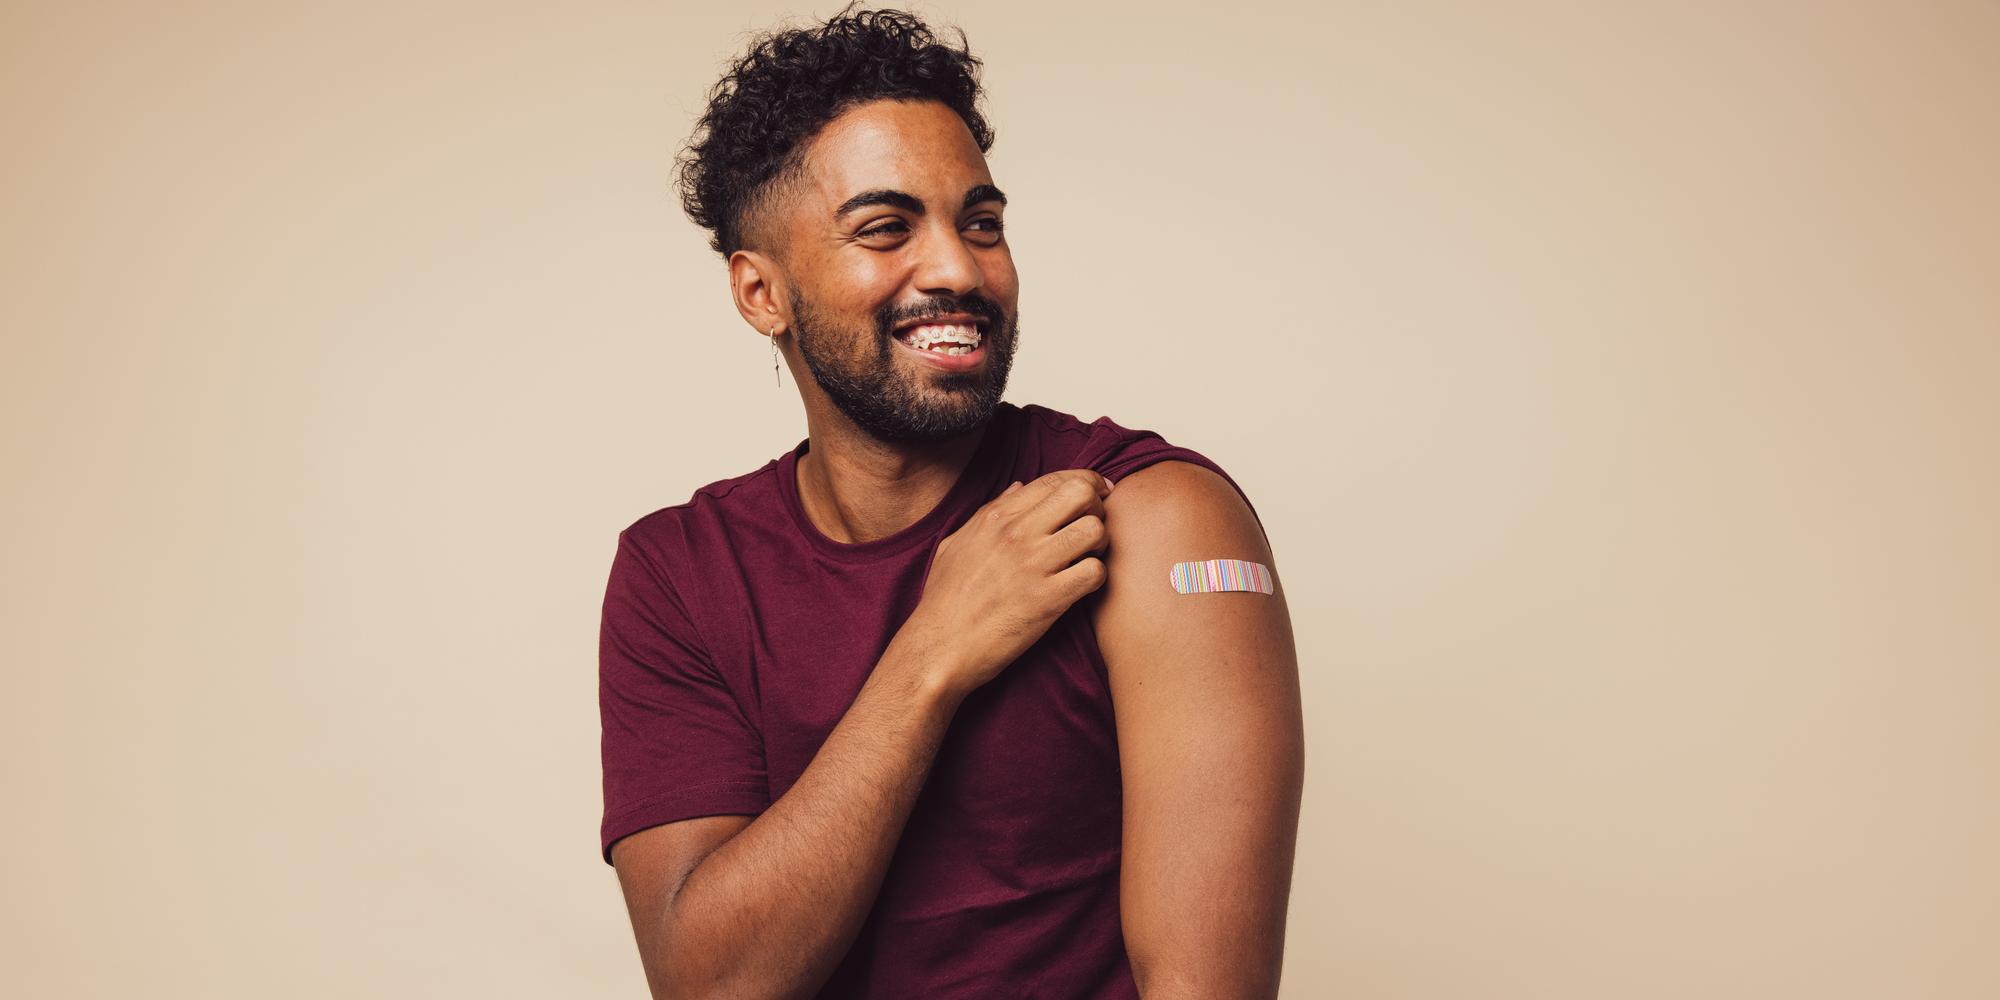 Man with Band-Aid from Vaccine